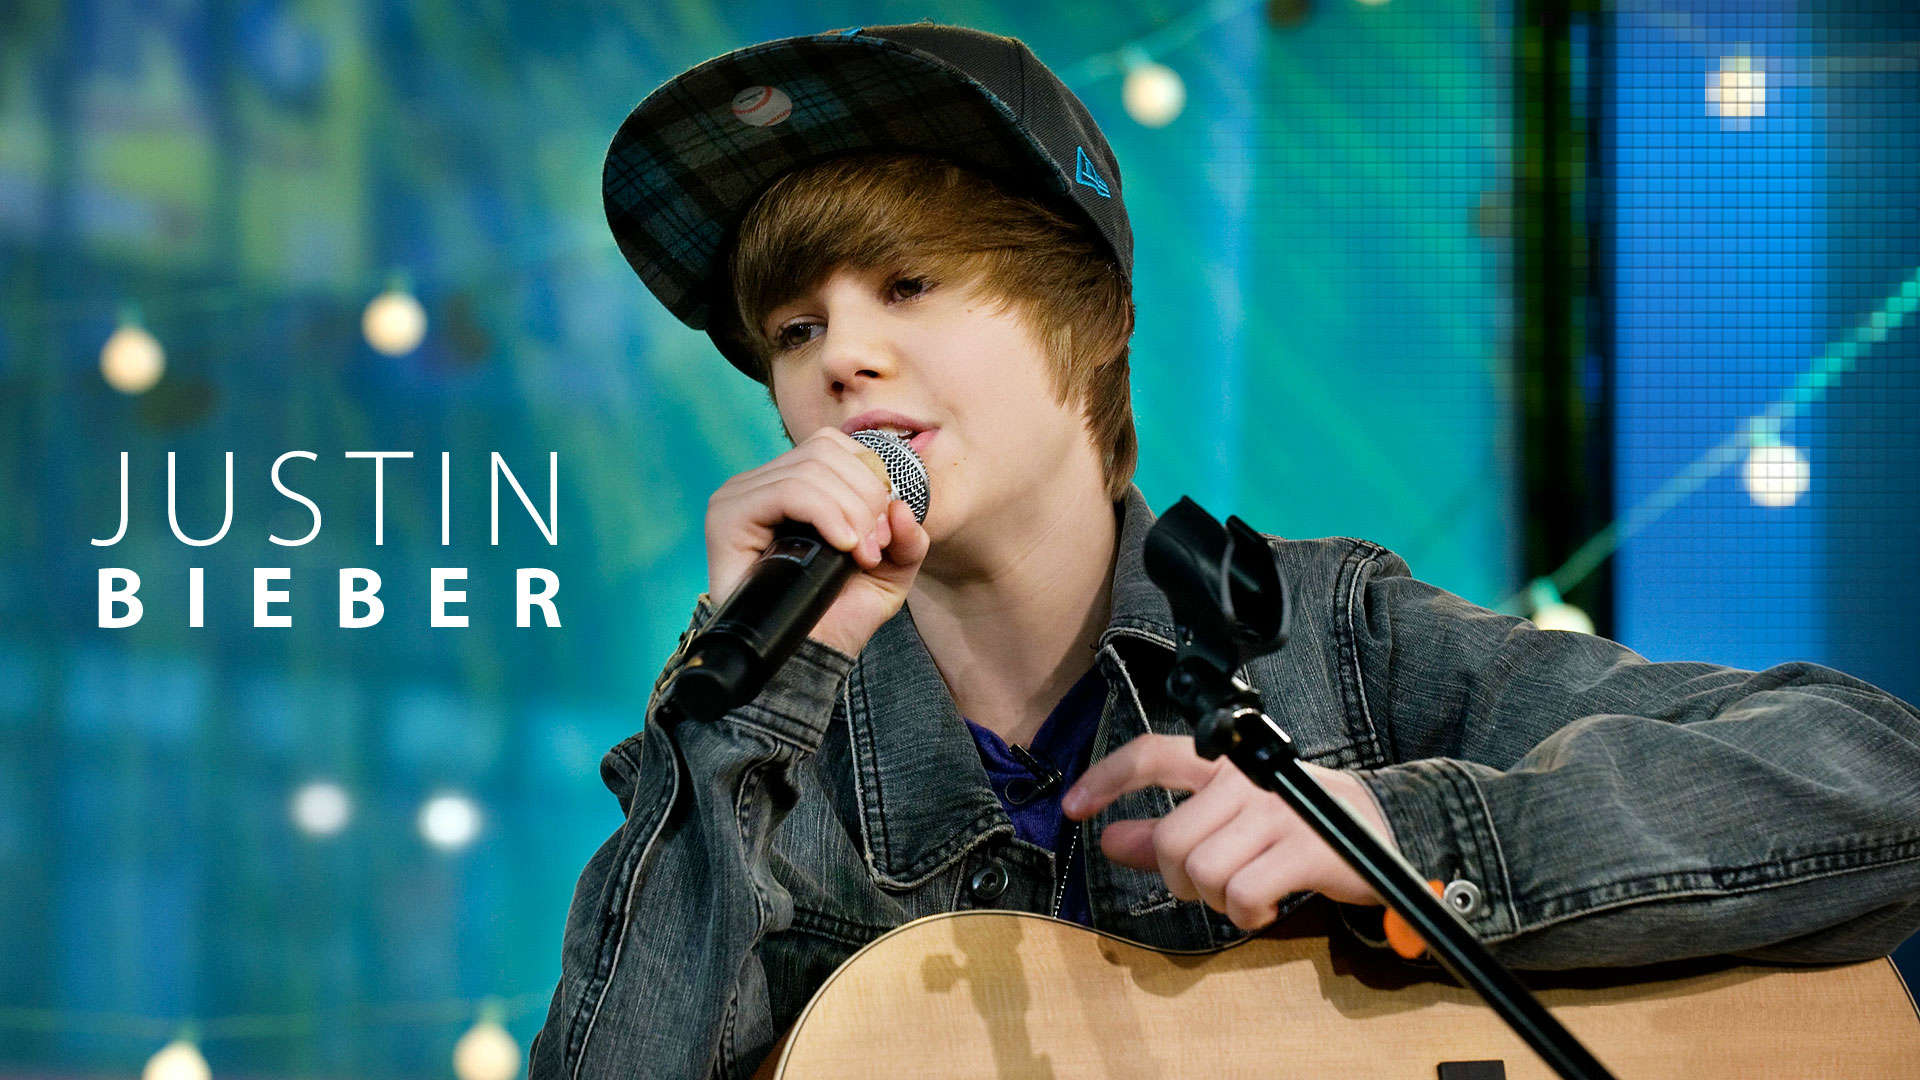 Page 3 of Bieber 4K wallpapers for your desktop or mobile screen